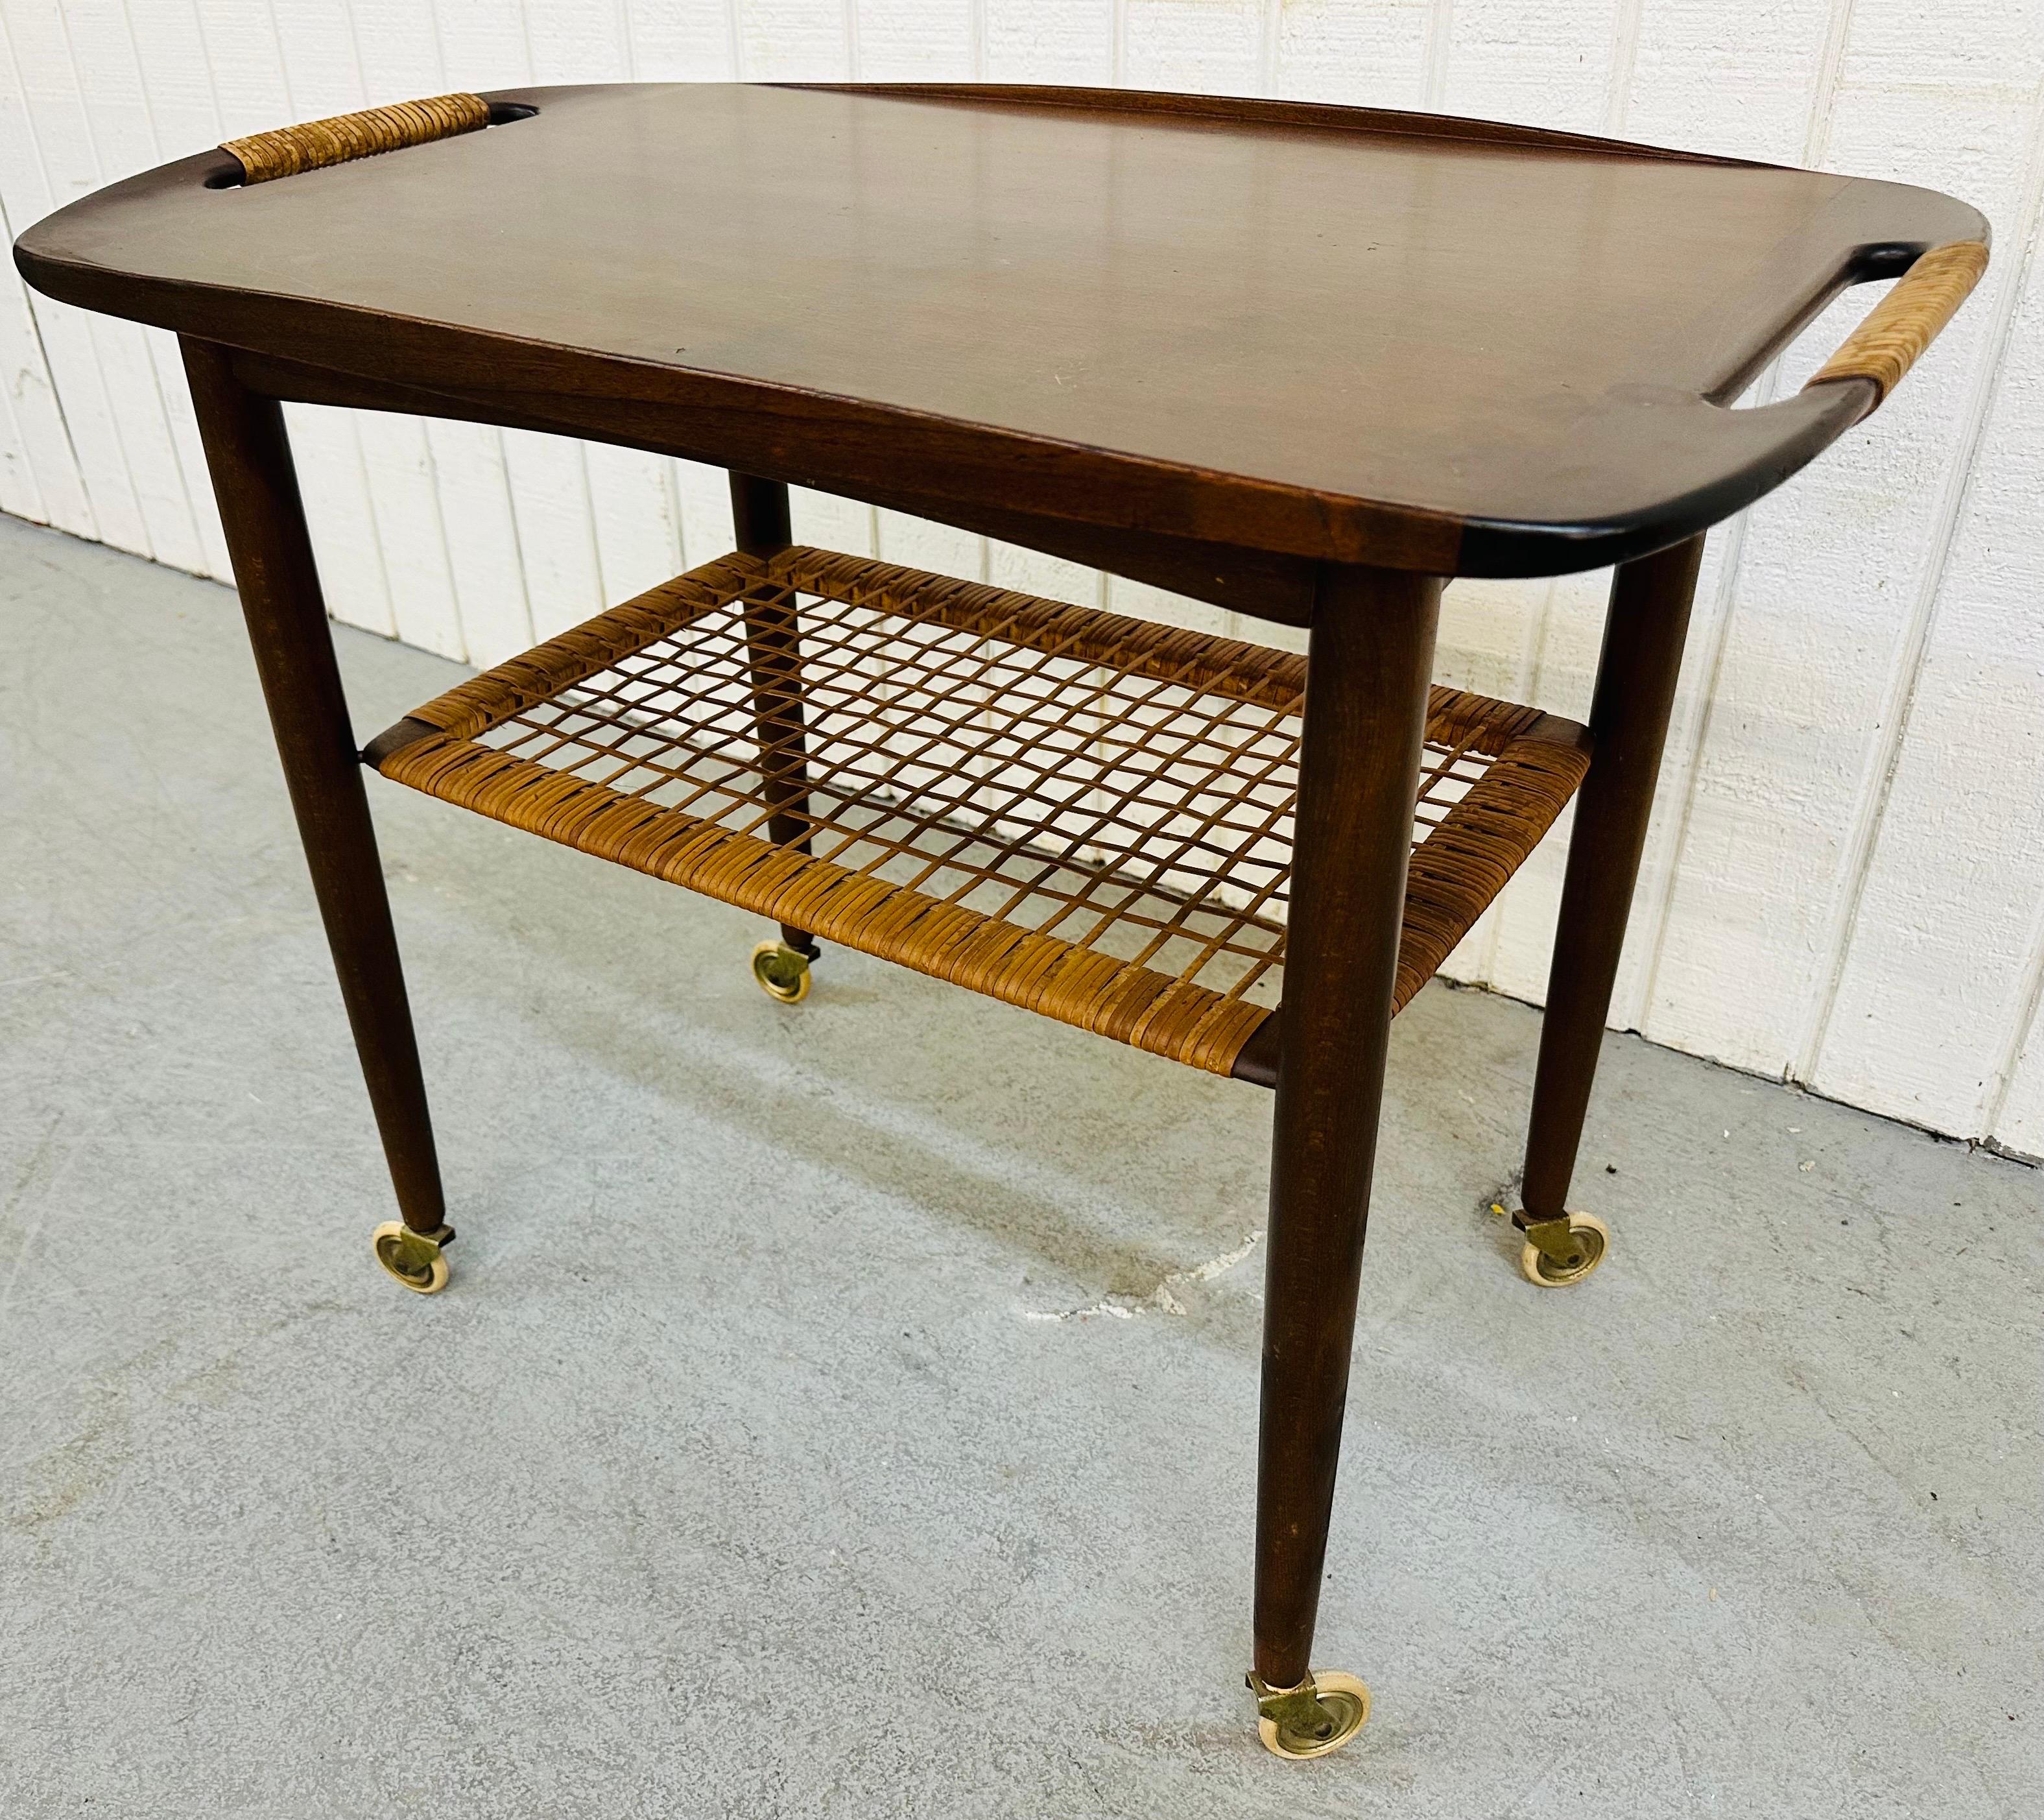 This listing is for a Mid-Century Danish Modern Walnut Bar Cart. Featuring a walnut top with woven handles, a woven bottom tier for storage, four long walnut legs with original wheels, and a Red Cross Denmark stamp underneath. This is an exceptional